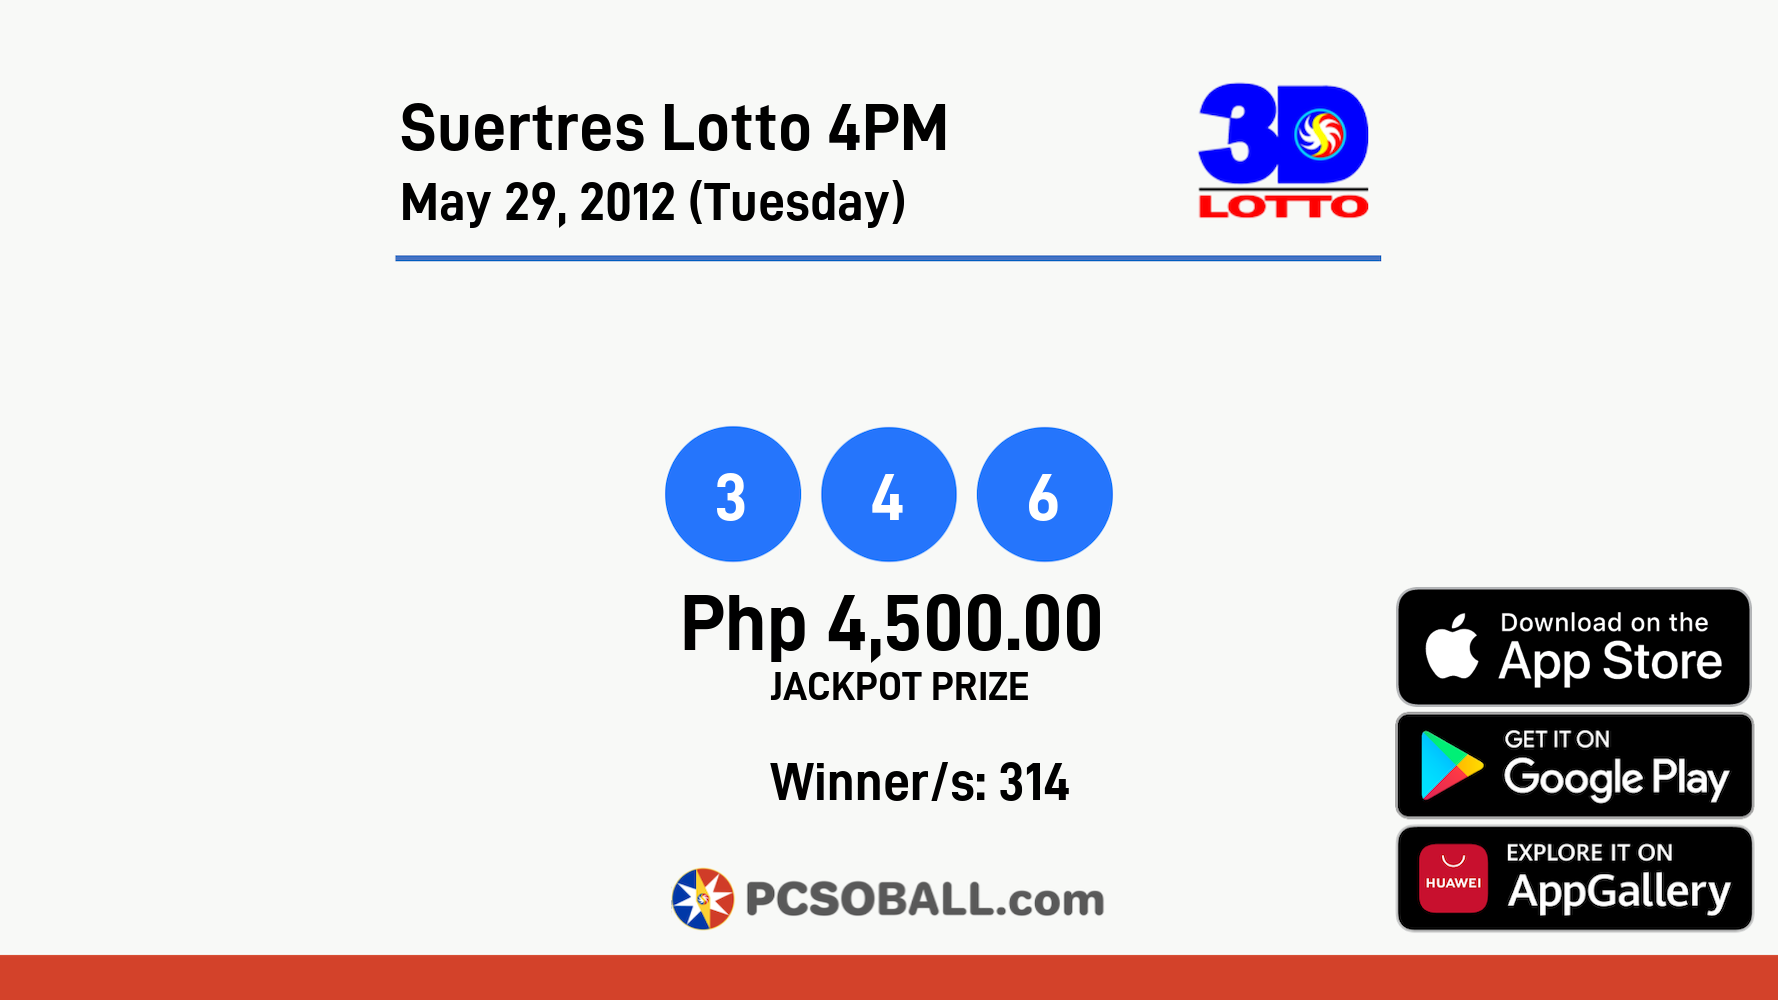 Suertres Lotto 4PM May 29, 2012 (Tuesday) Result